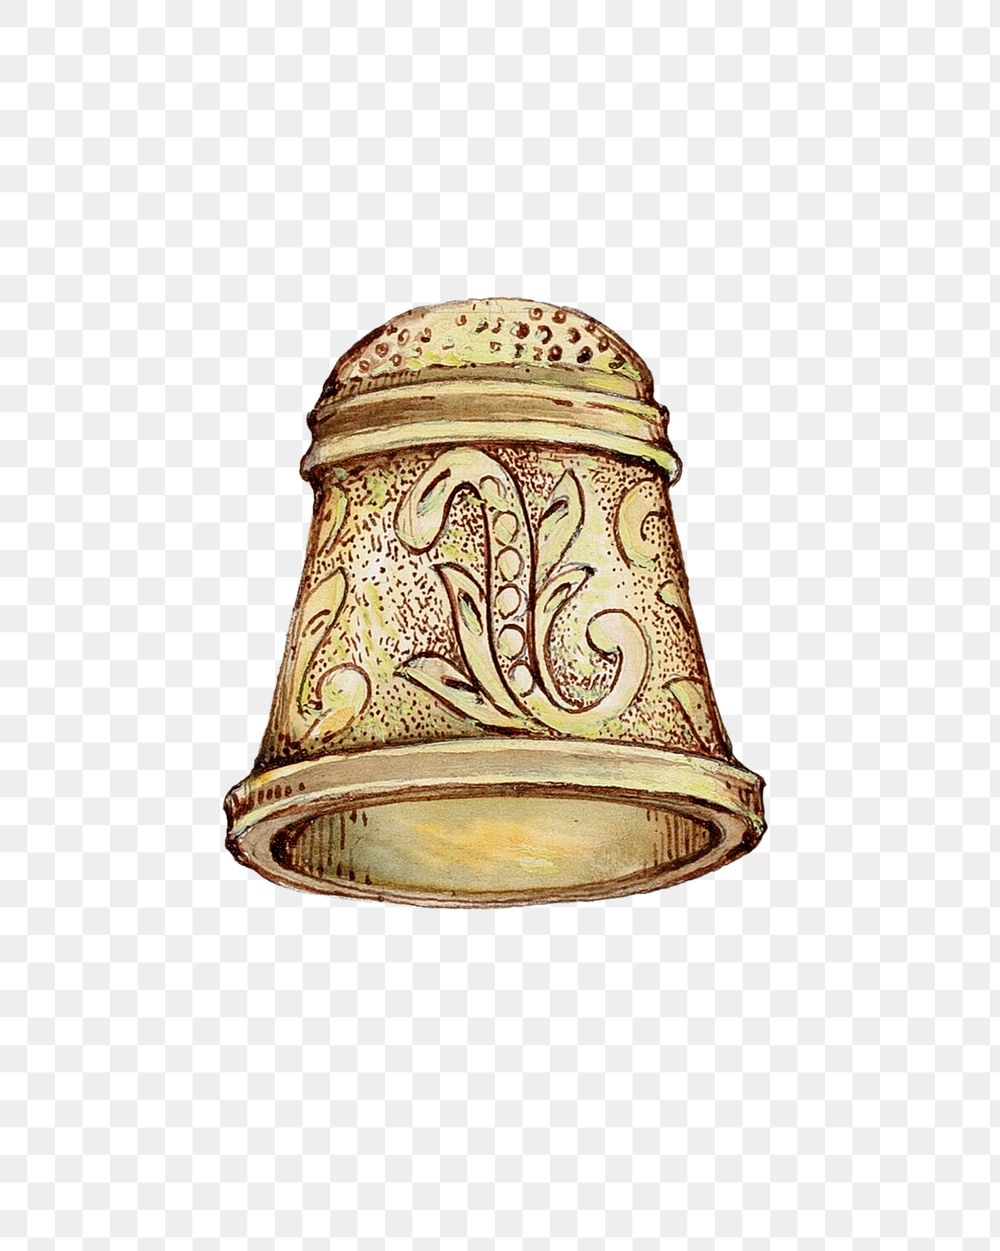 Vintage gold thimble png illustration, remixed from the artwork by George Seideneck